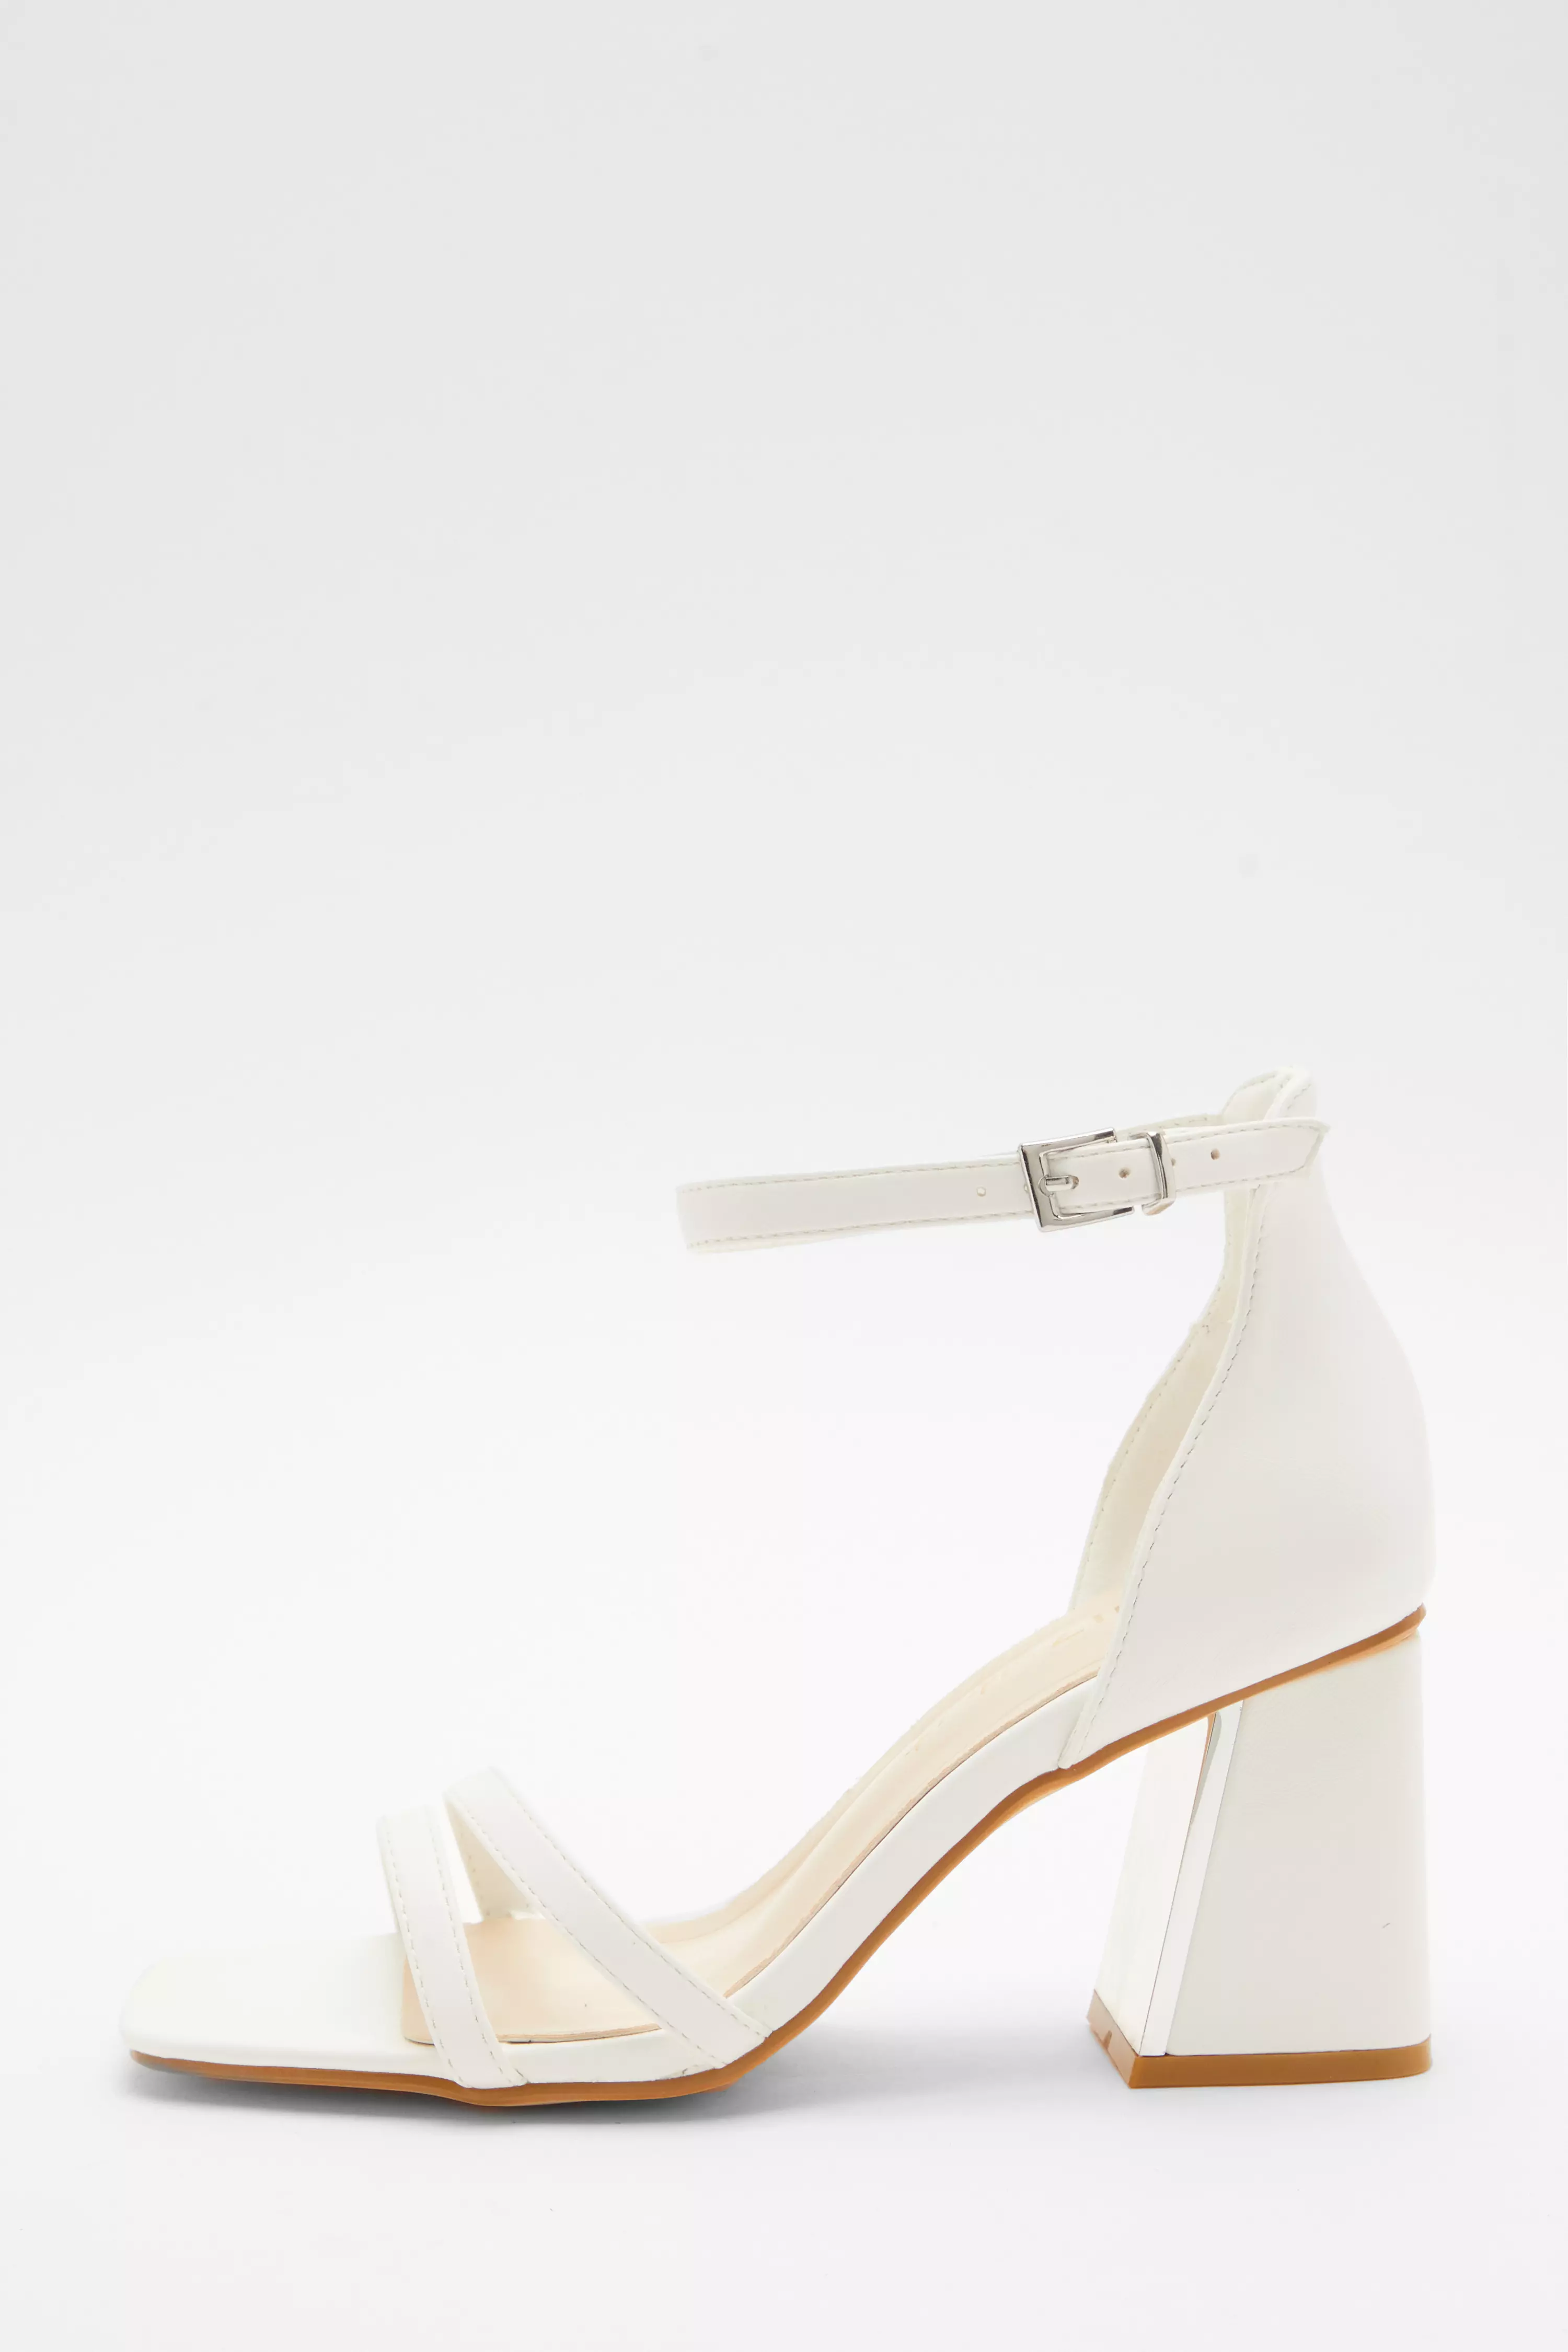 Wide Fit White Asymmetric Strap Heeled Sandals - QUIZ Clothing